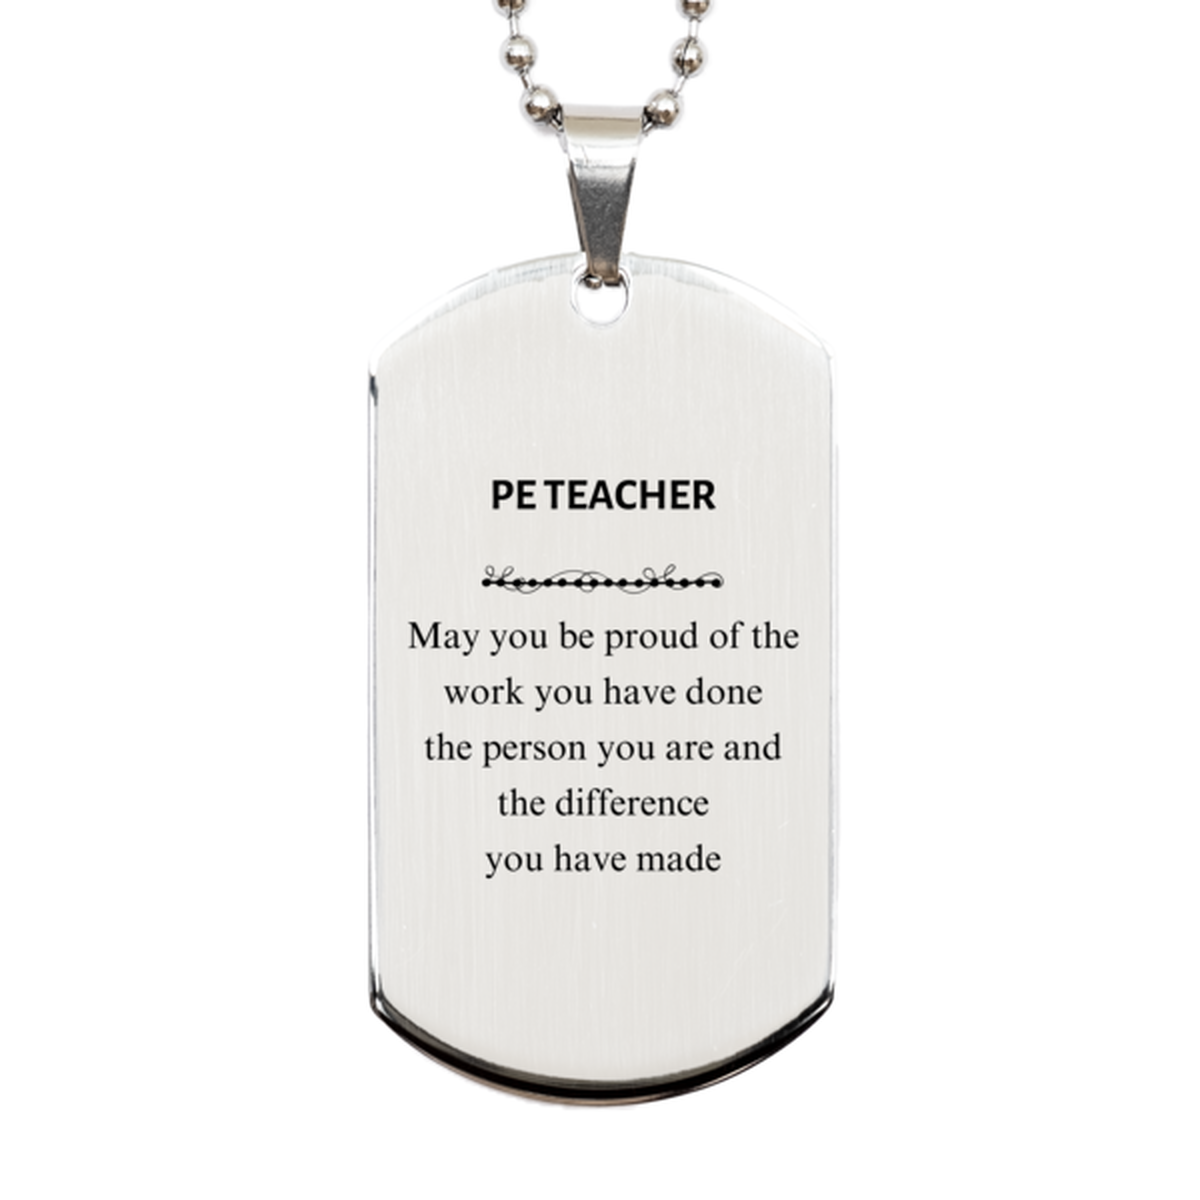 PE Teacher May you be proud of the work you have done, Retirement PE Teacher Silver Dog Tag for Colleague Appreciation Gifts Amazing for PE Teacher